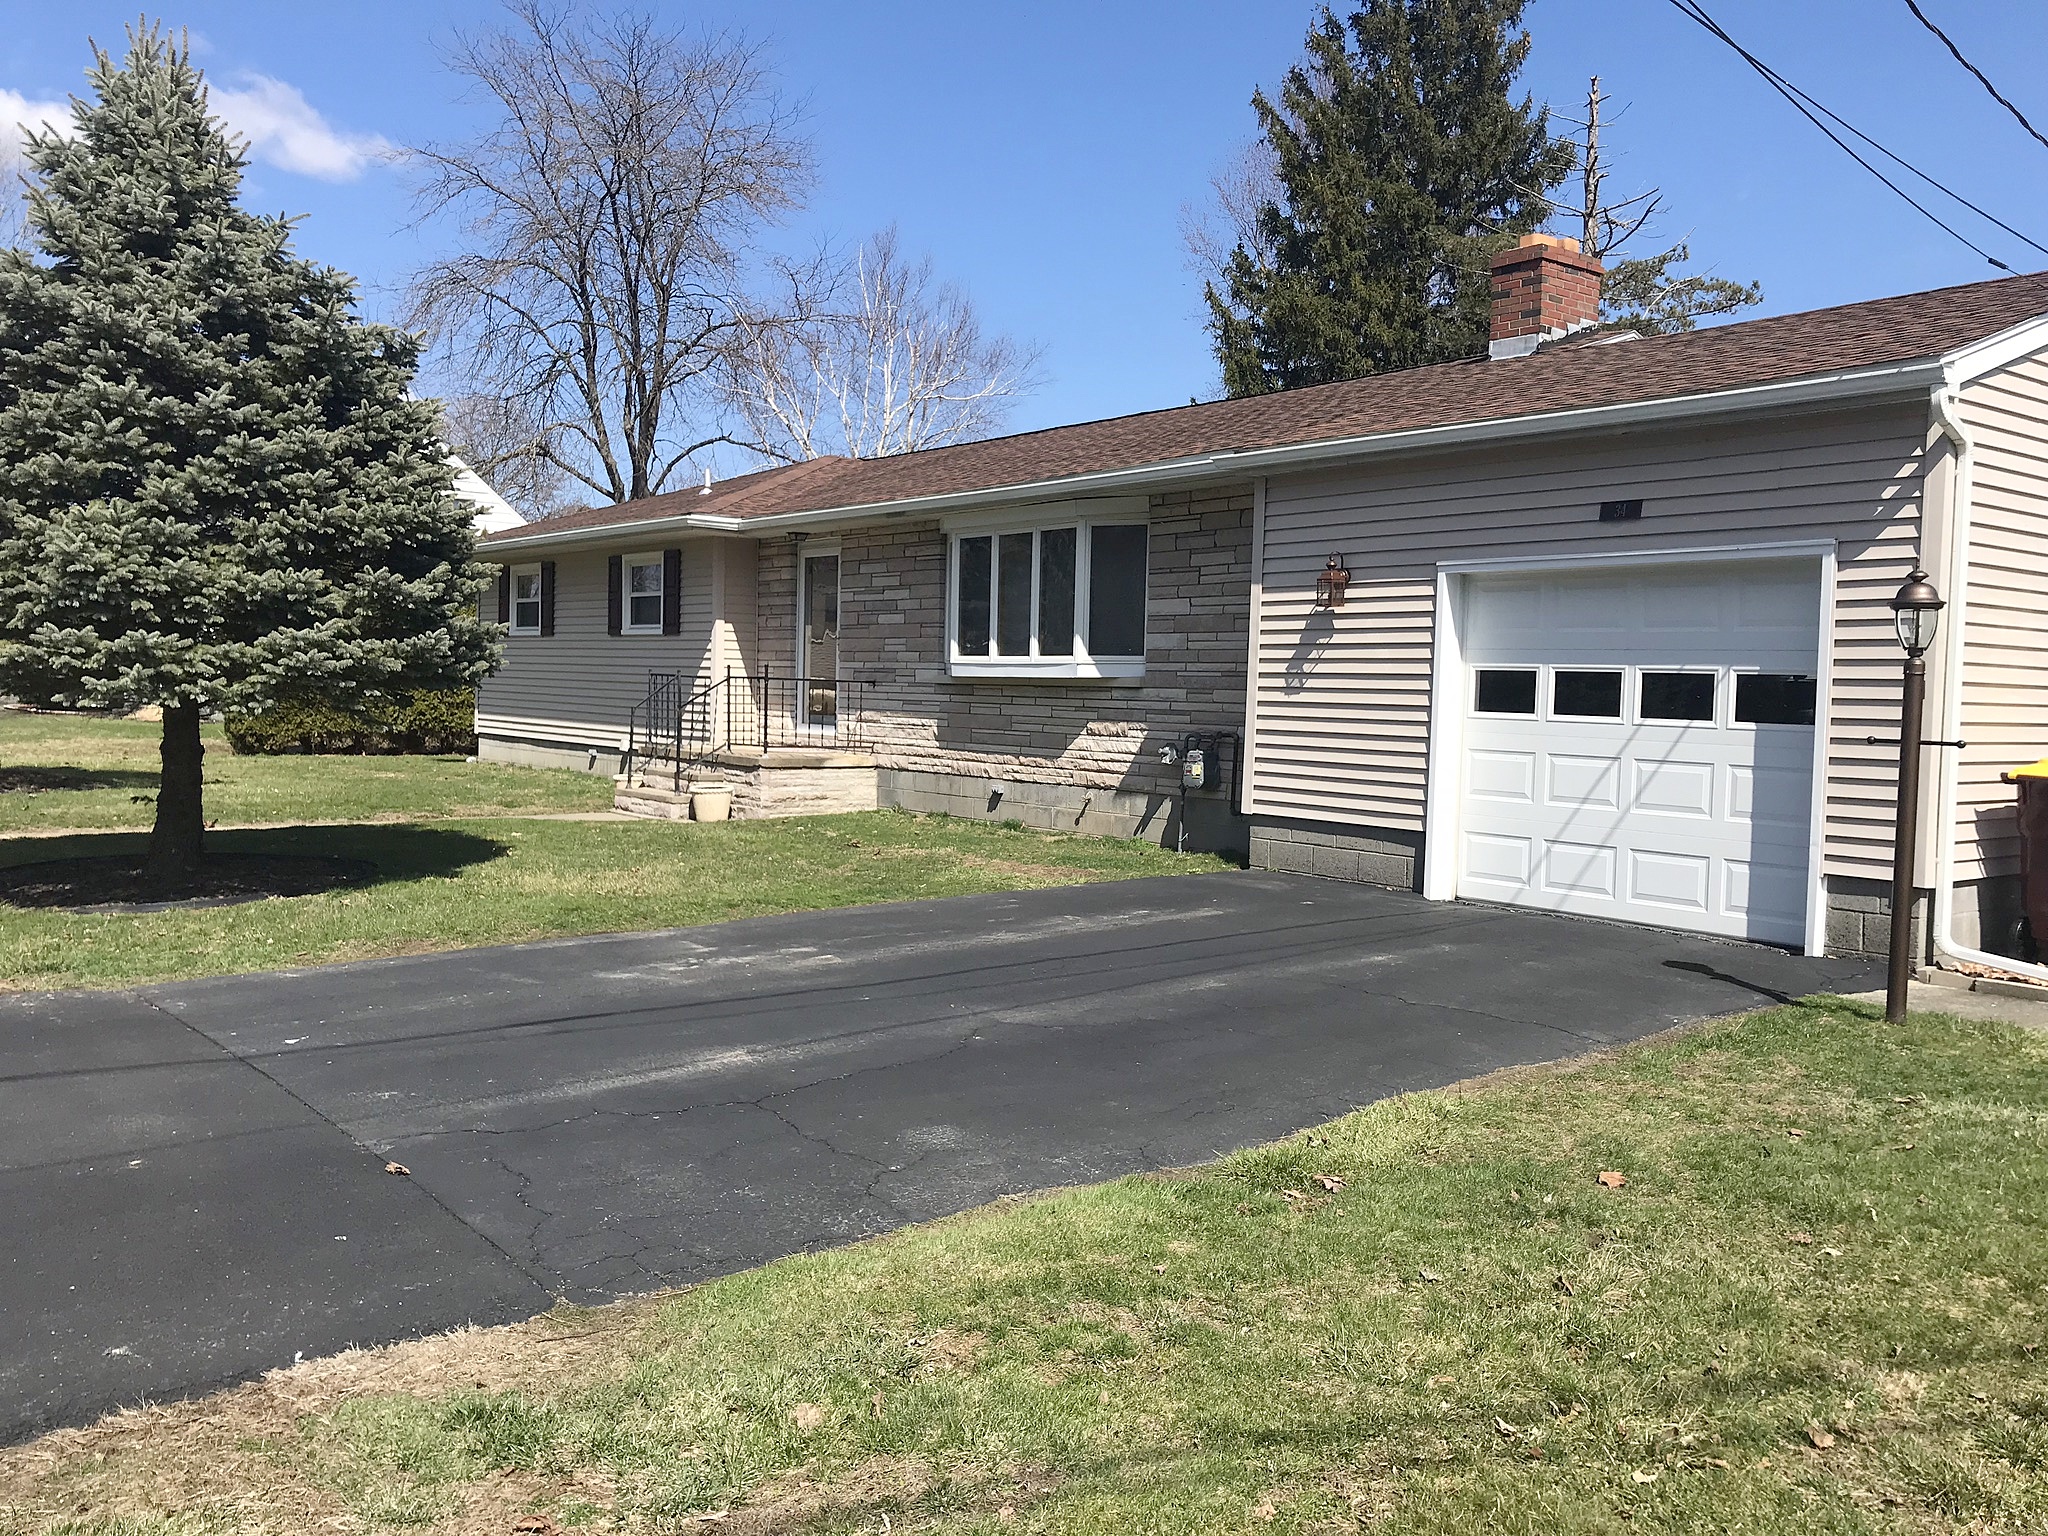 3 Bedrooms / 1.5 Bathrooms - Est. $1,534.00 / Month* for rent in Mechanicville, NY